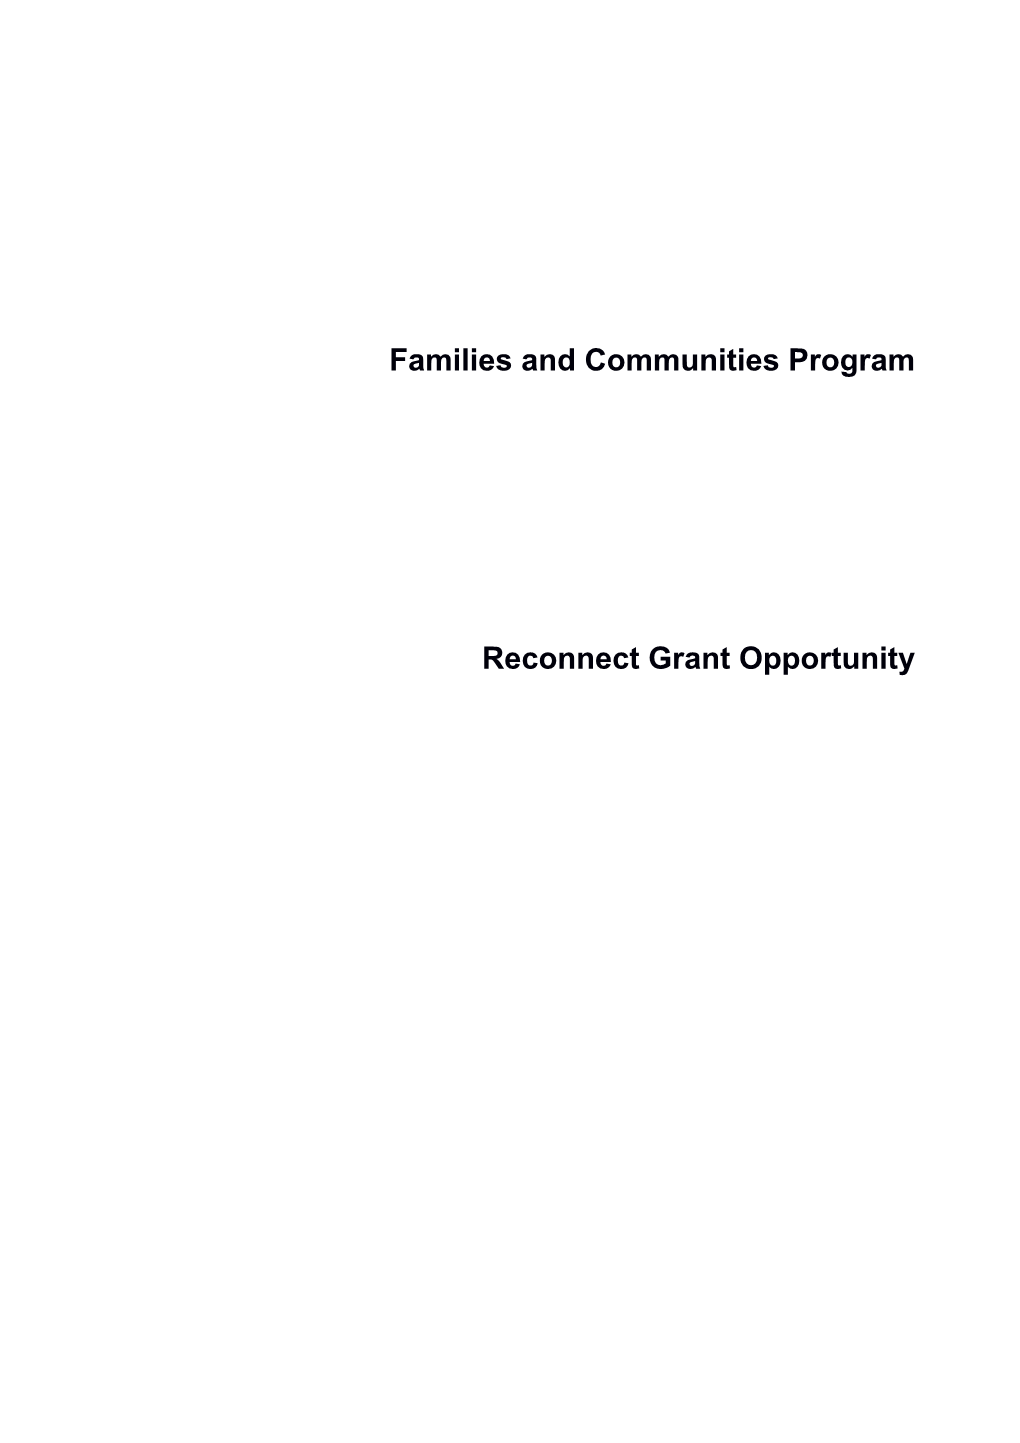 1.Families and Communities: Reconnect Program Processes